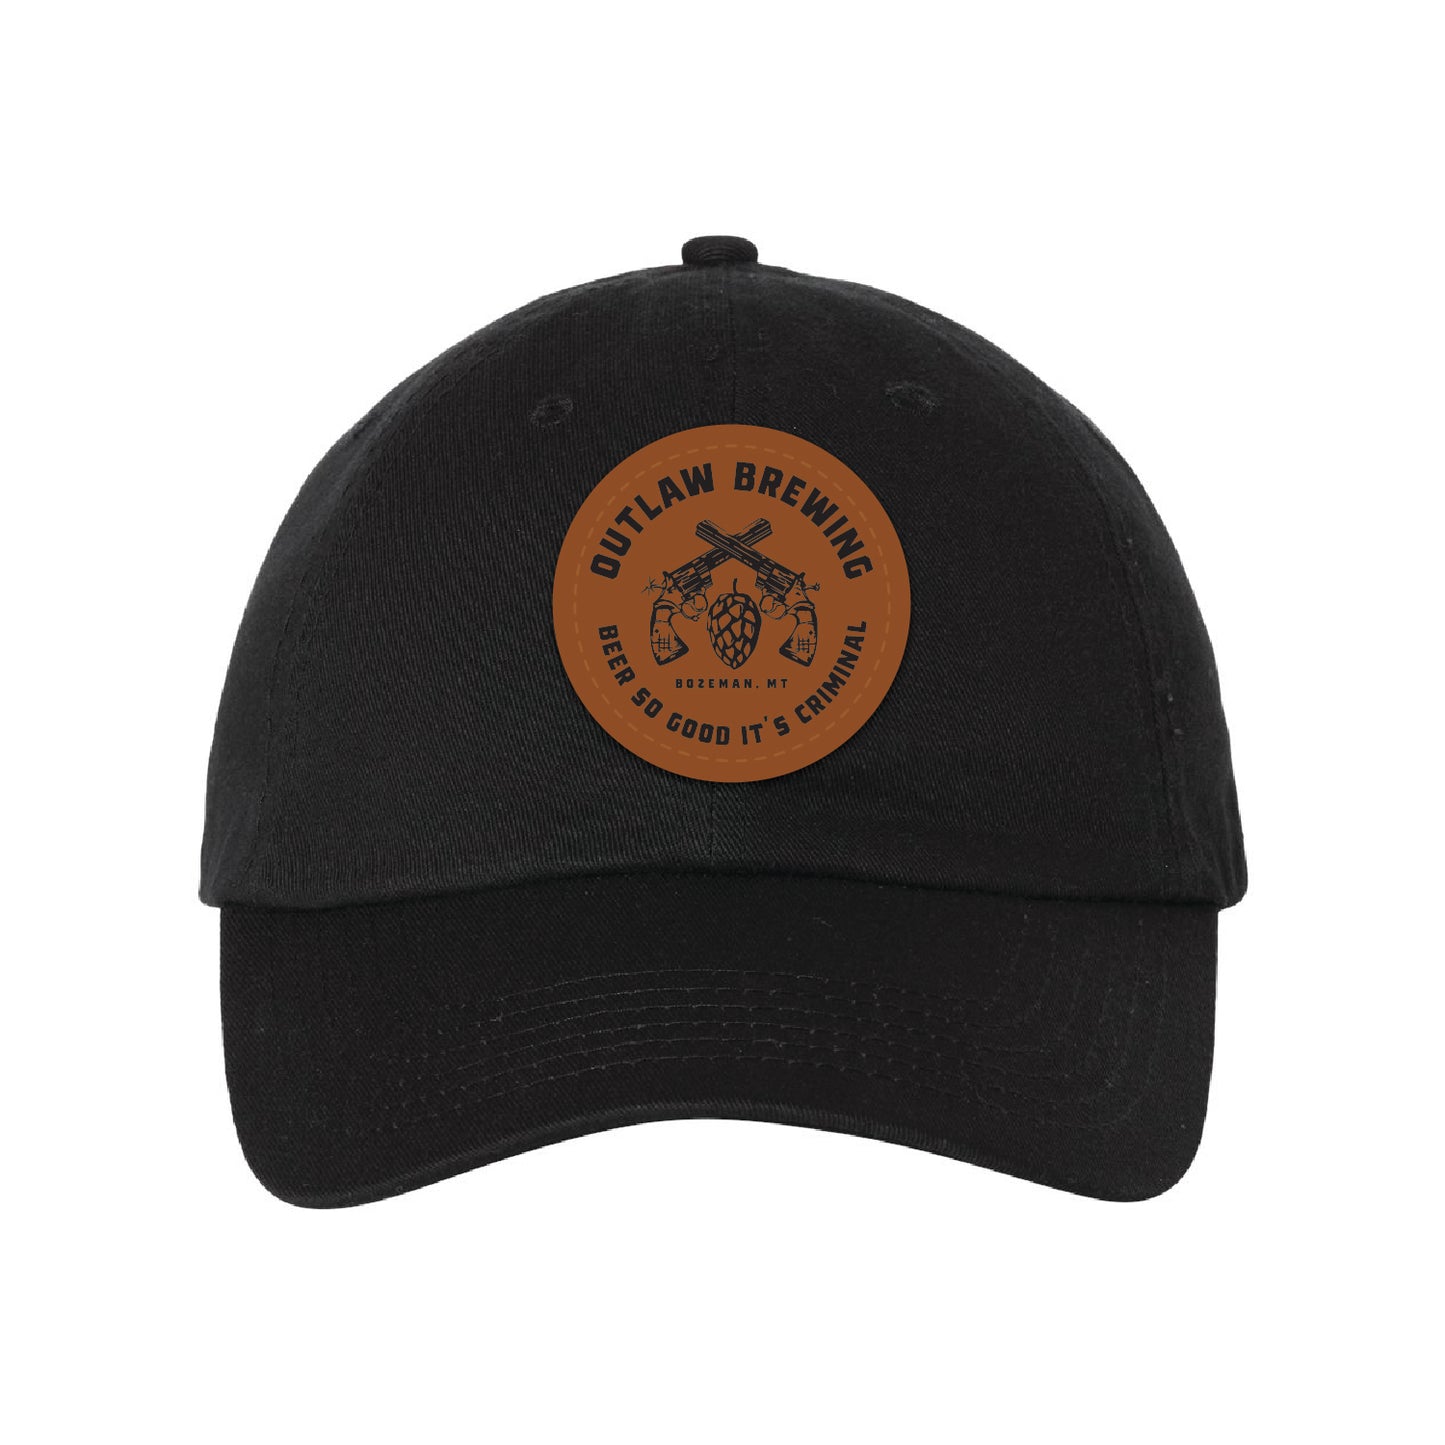 Outlaw Brewing Dad Cap